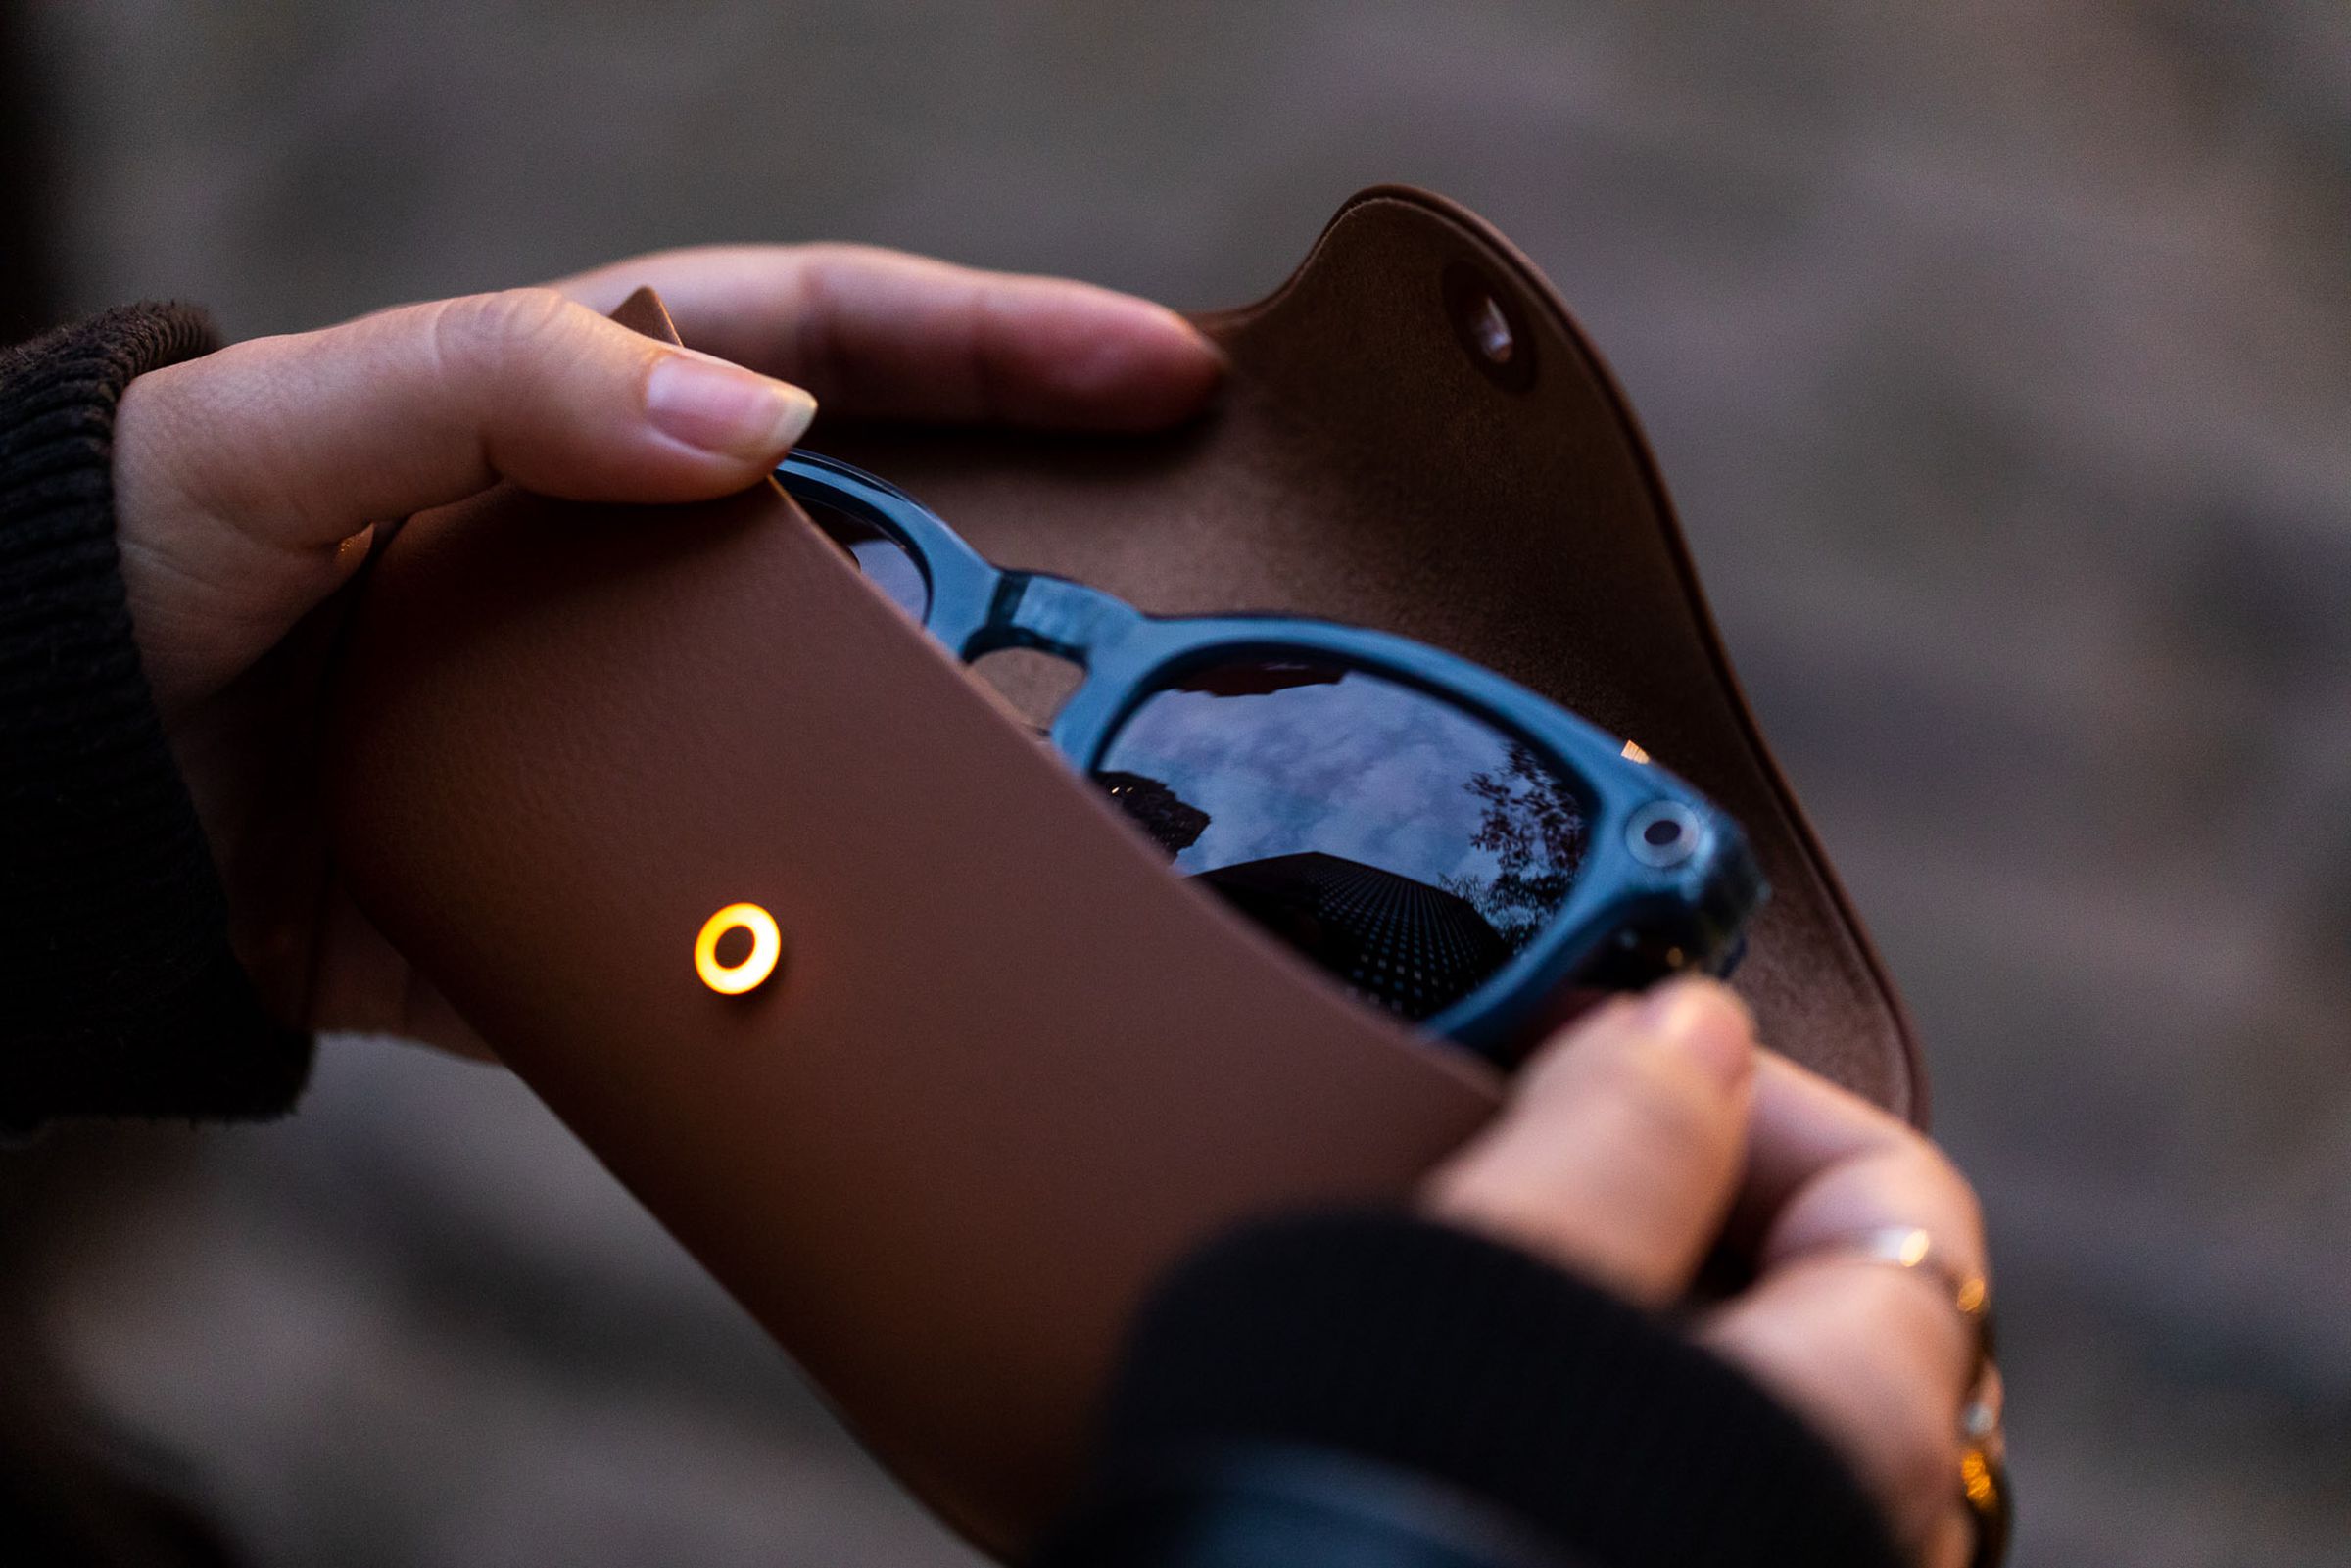 Person holding Ray-Ban Meta Smart Glasses charging case with glasses in them.